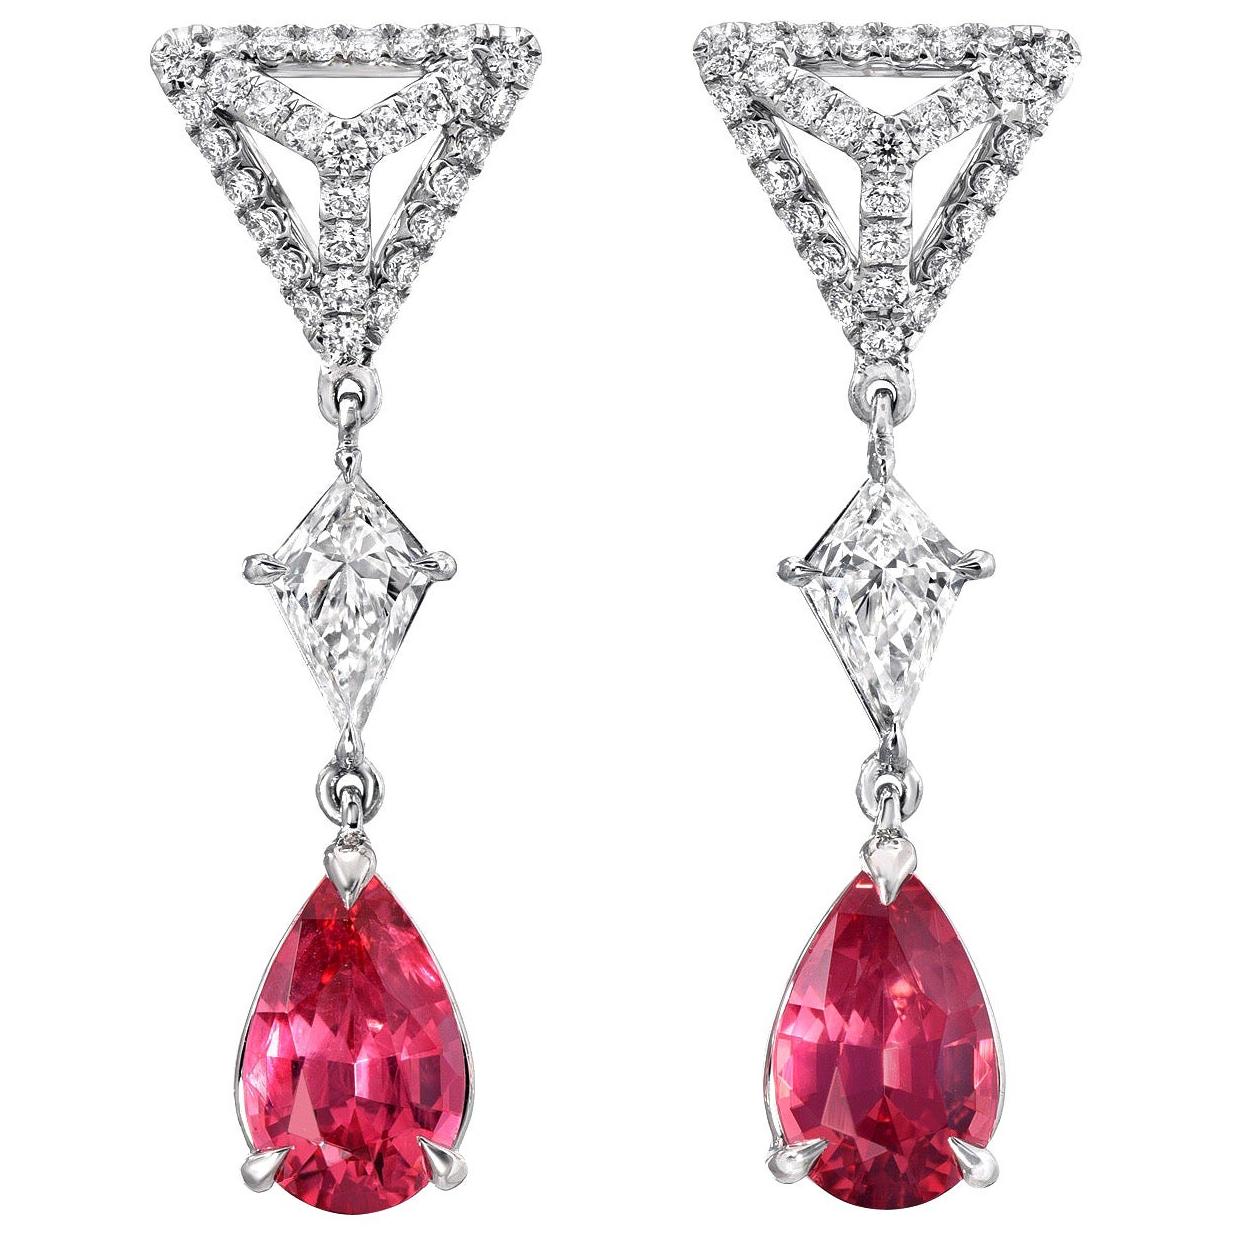 Pink Spinel Earrings 1.83 Carat Pear Shapes